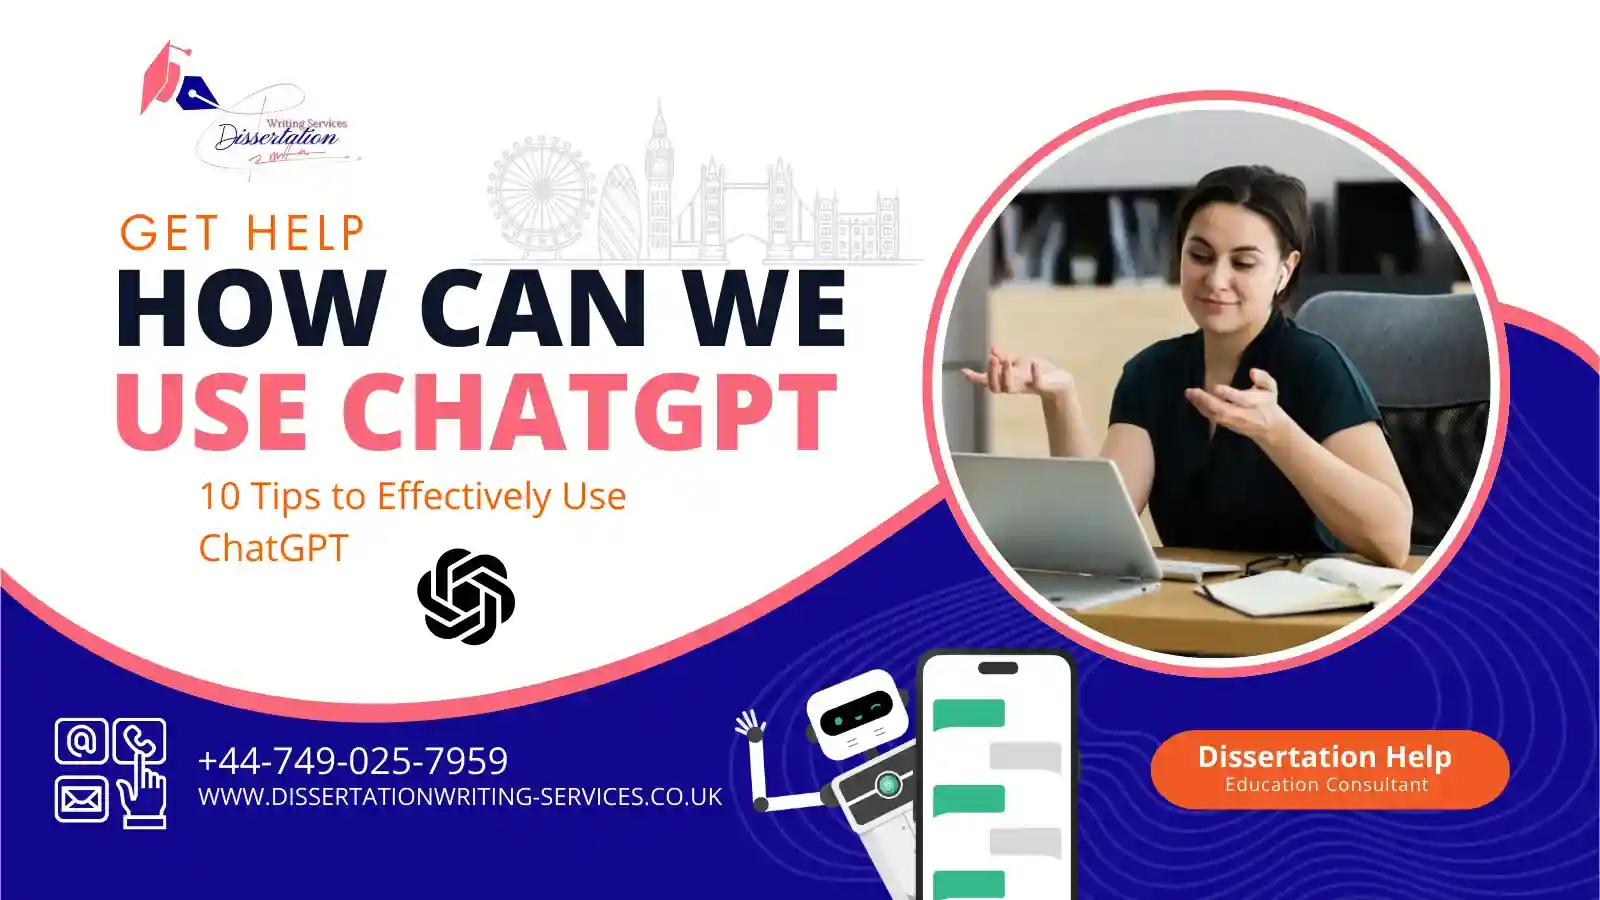 HOW CAN WE USE ChatGPT: 10 Tips to Effectively Use ChatGPT